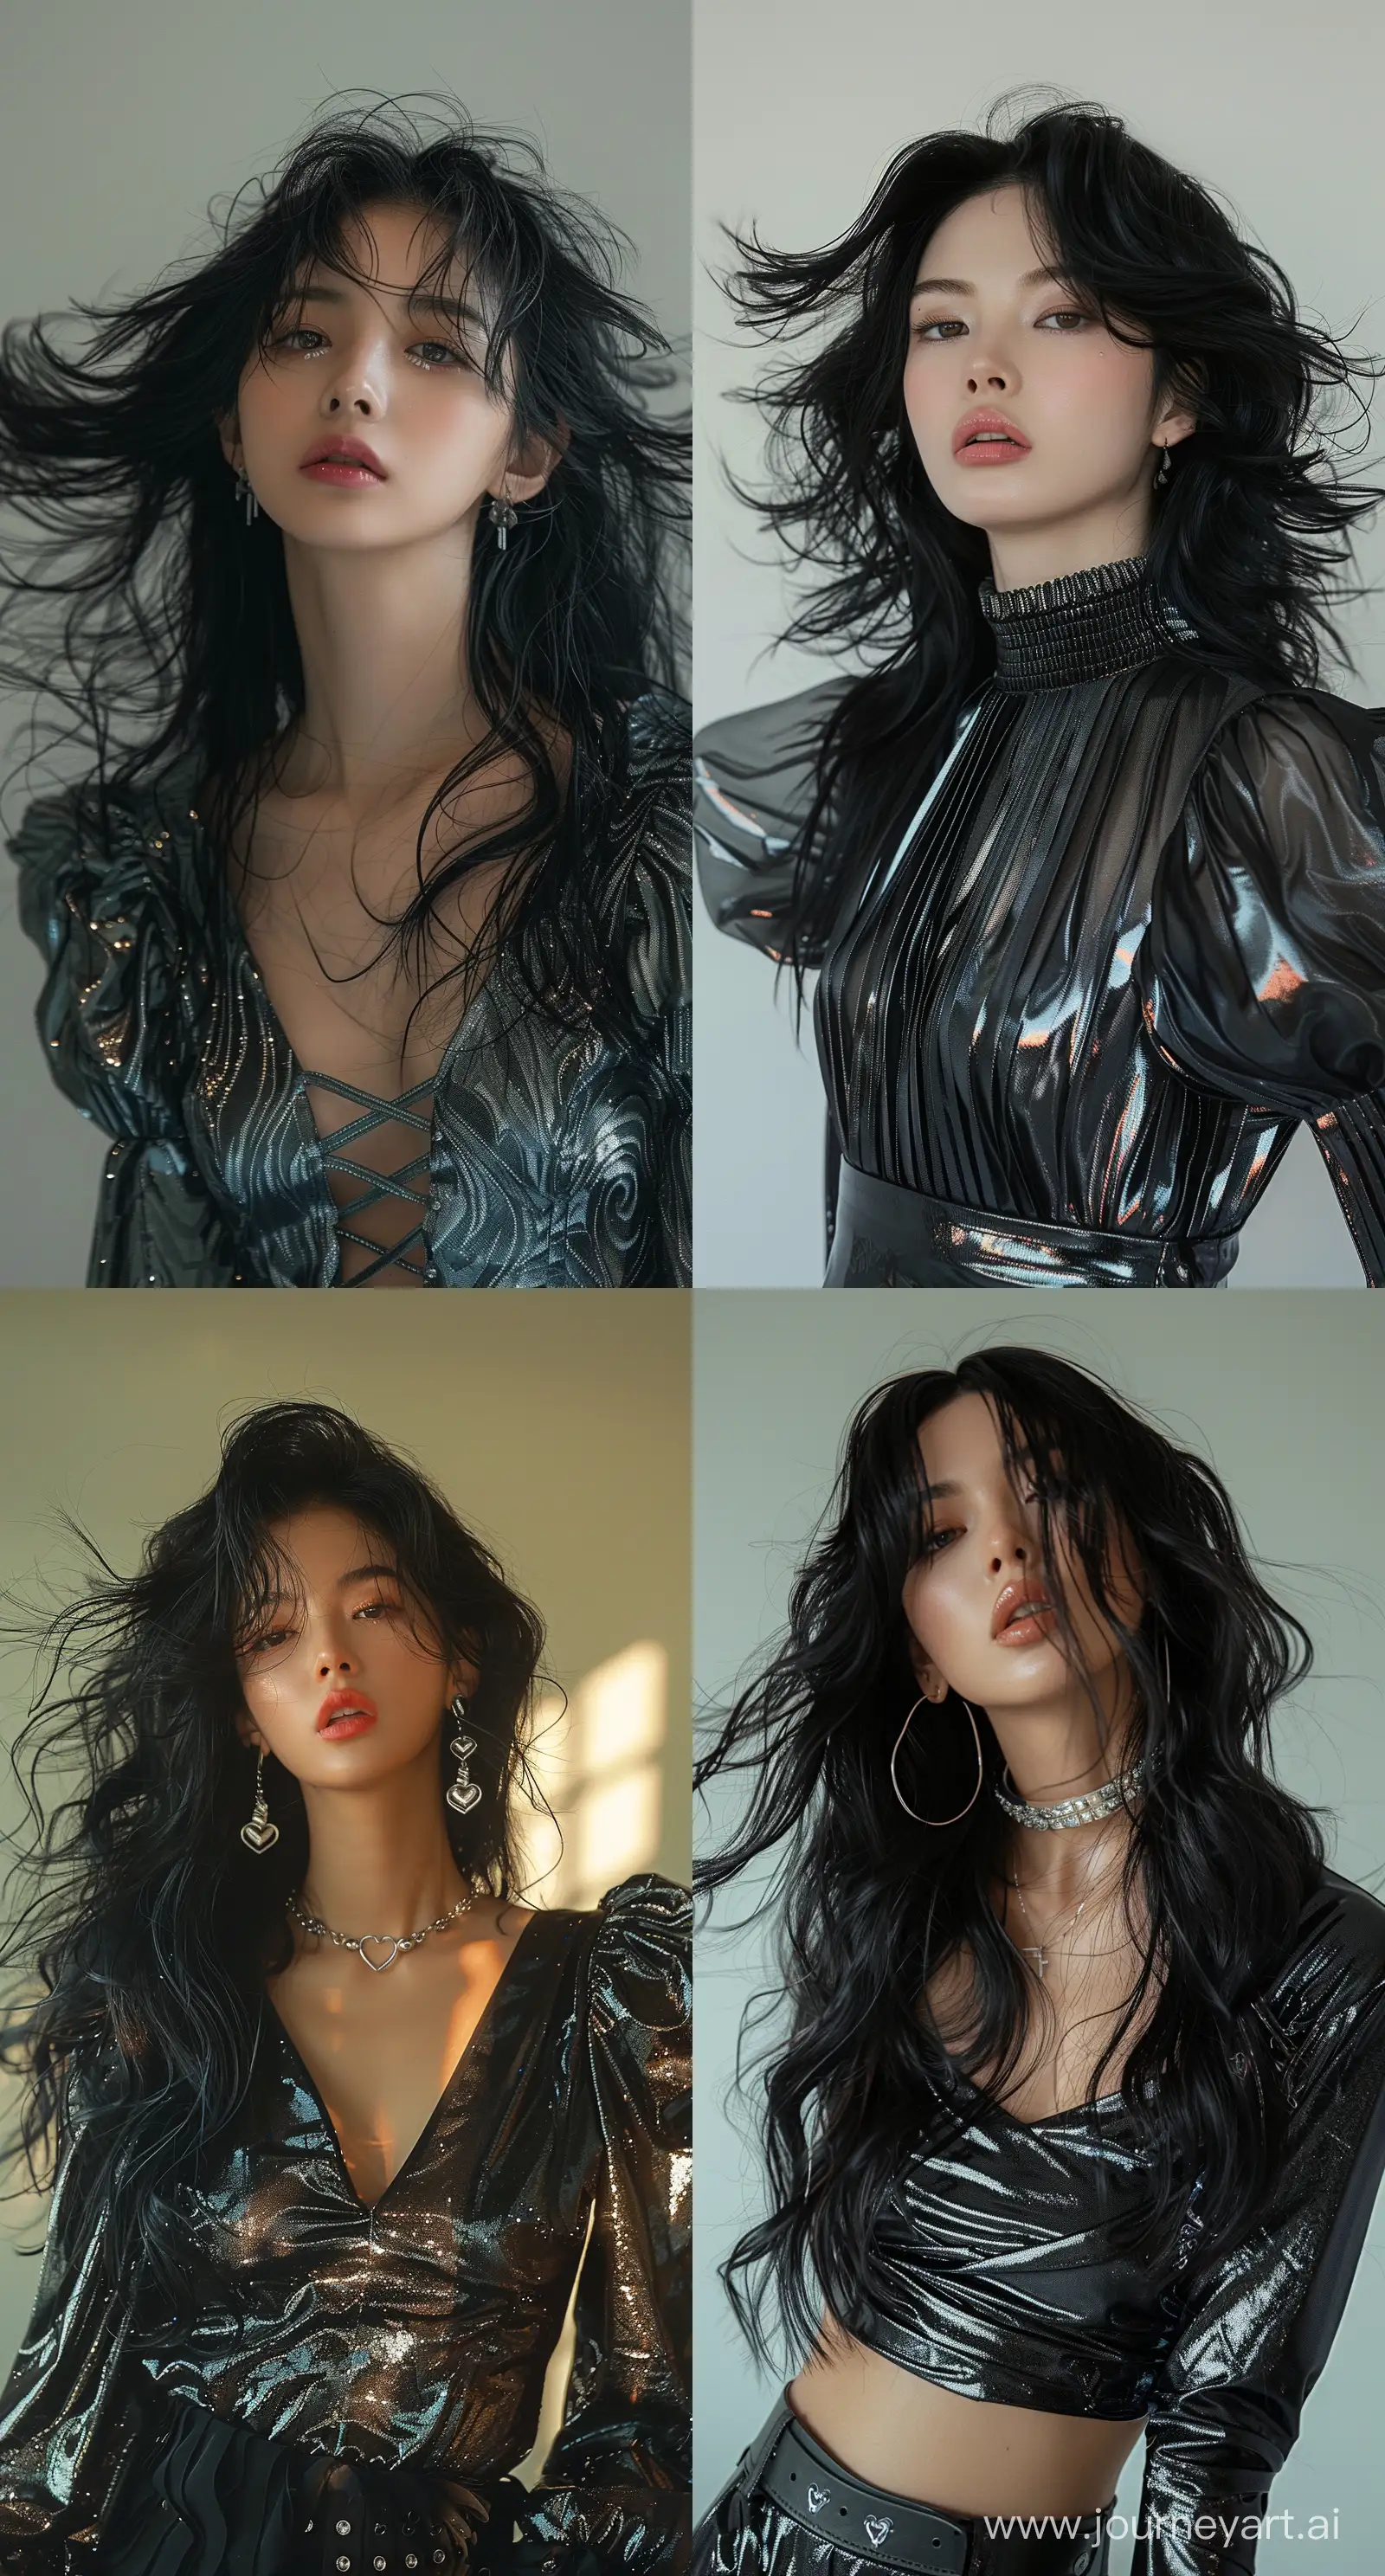 Expressive-Portrait-of-a-Woman-with-Flowing-Black-Hair-in-Chrome-Hearts-Style